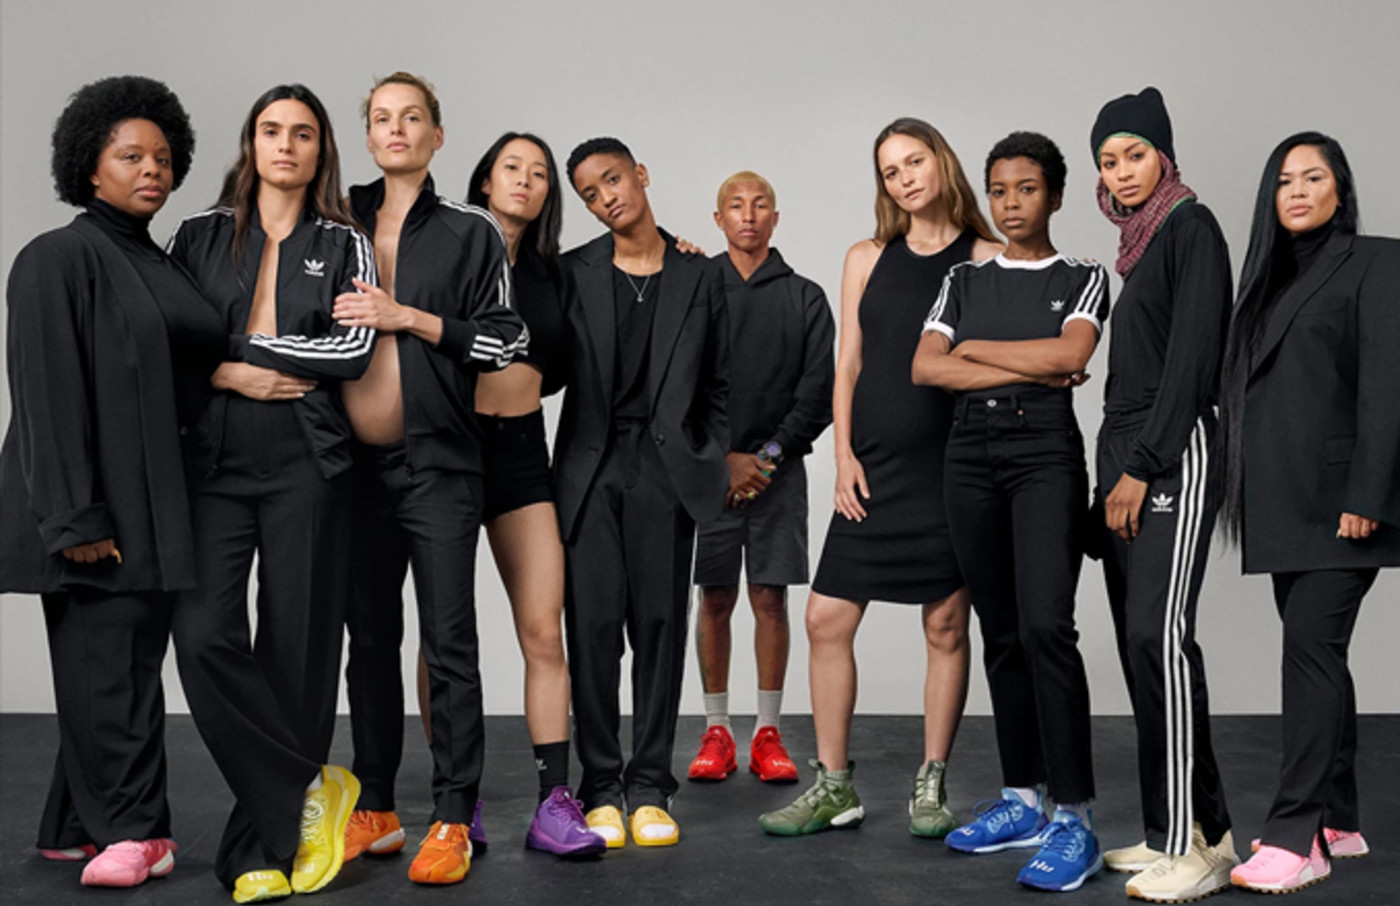 Napier amplificación Descortés Pharrell Champions Women's Rights With 'Now Is Her Time' Adidas Originals  Campaign | Complex